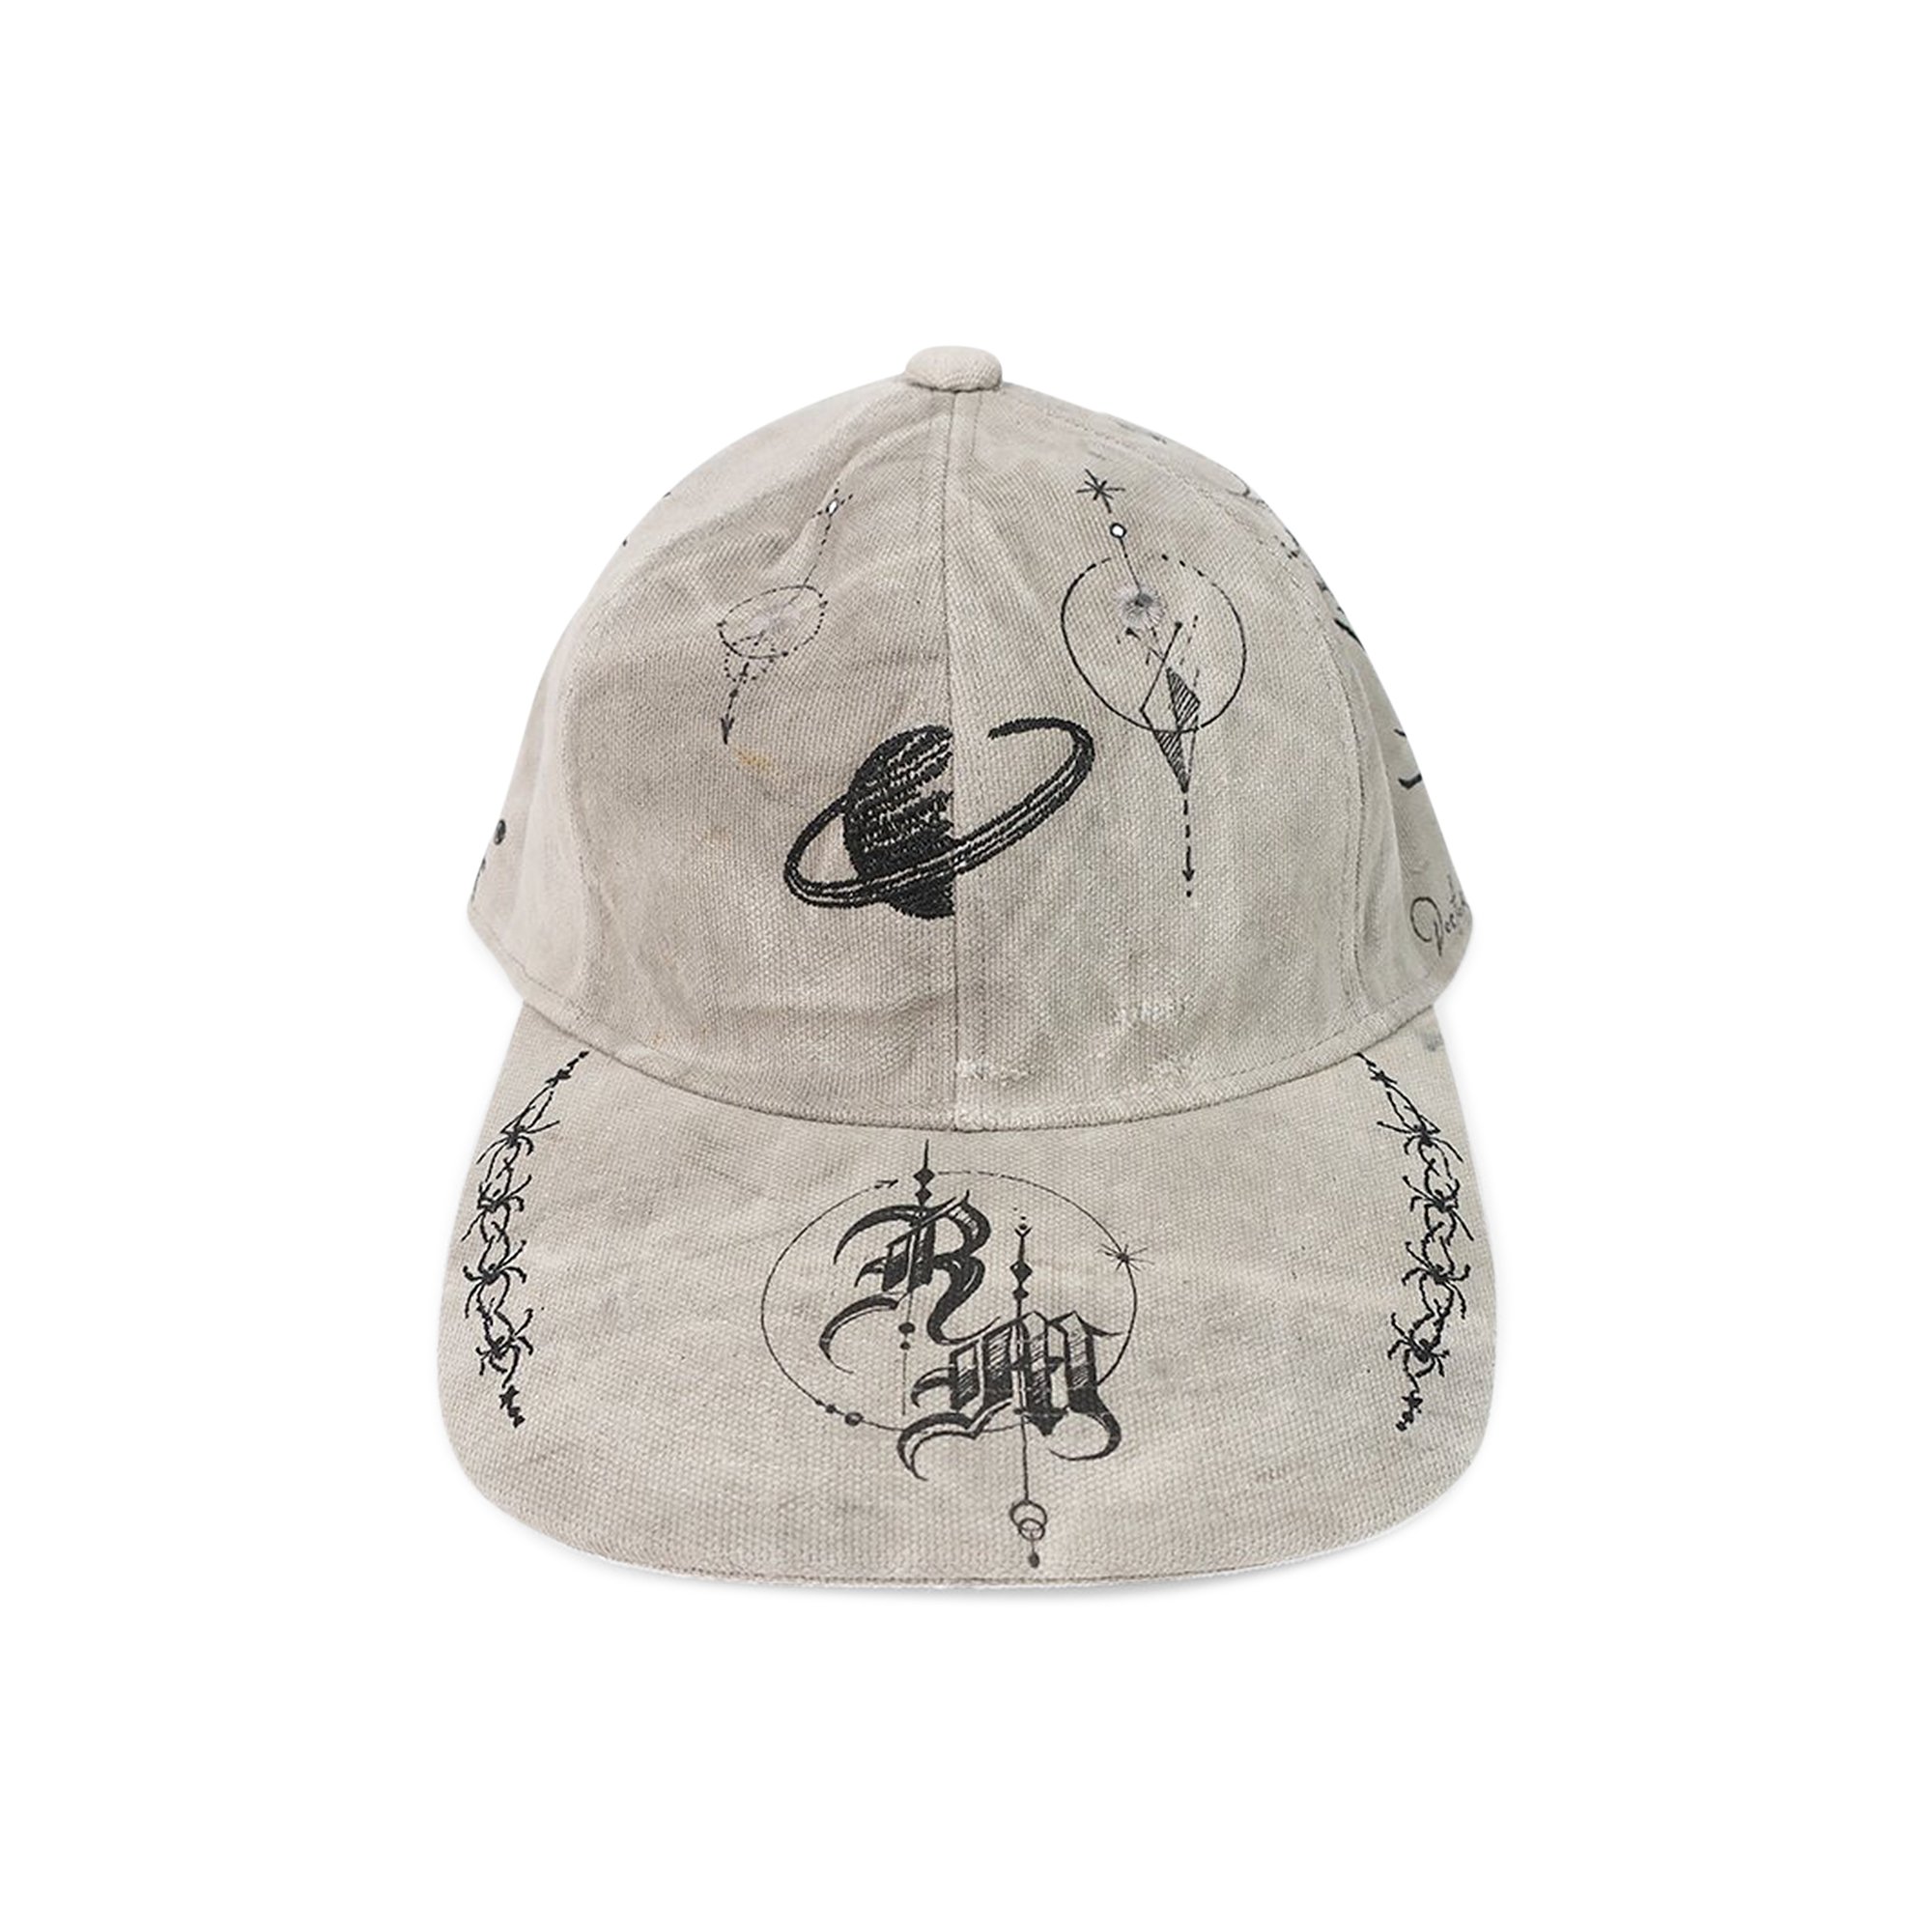 Buy READYMADE x Dr. Woo Tattoo Cap 'White' - REDW CO WH 00 00 02